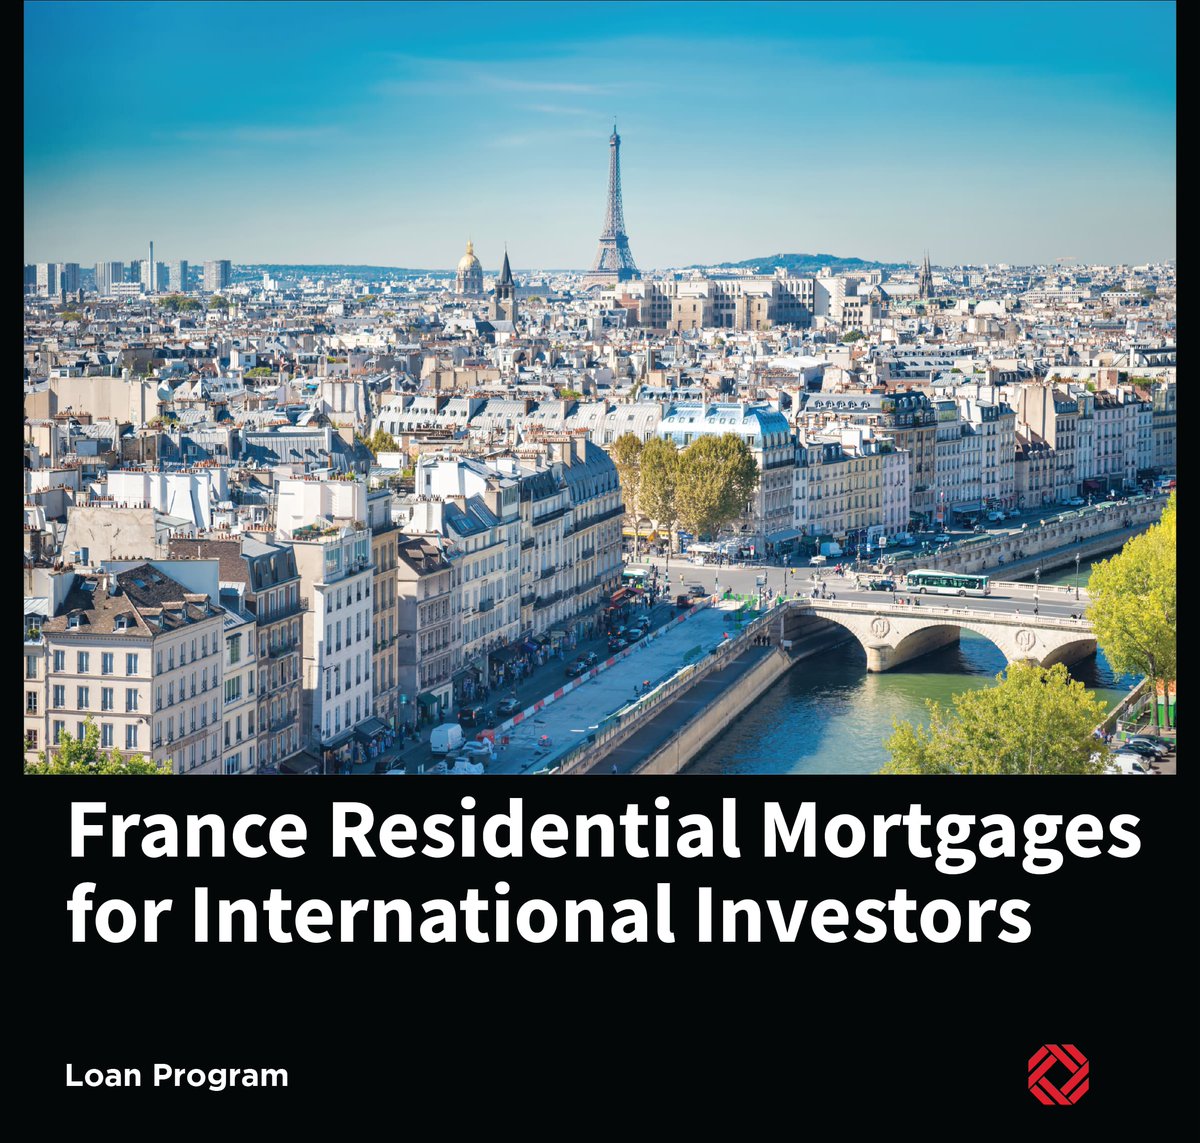 France Residential Mortgages for International Investors

Contact us today to at hello@gmg.asia to learn more about our French residential mortgages.

#frenchriveria #france #cotedazur #mediterranean #southoffrance #francerealestate #francepropertyinvesting #propertyinvestor